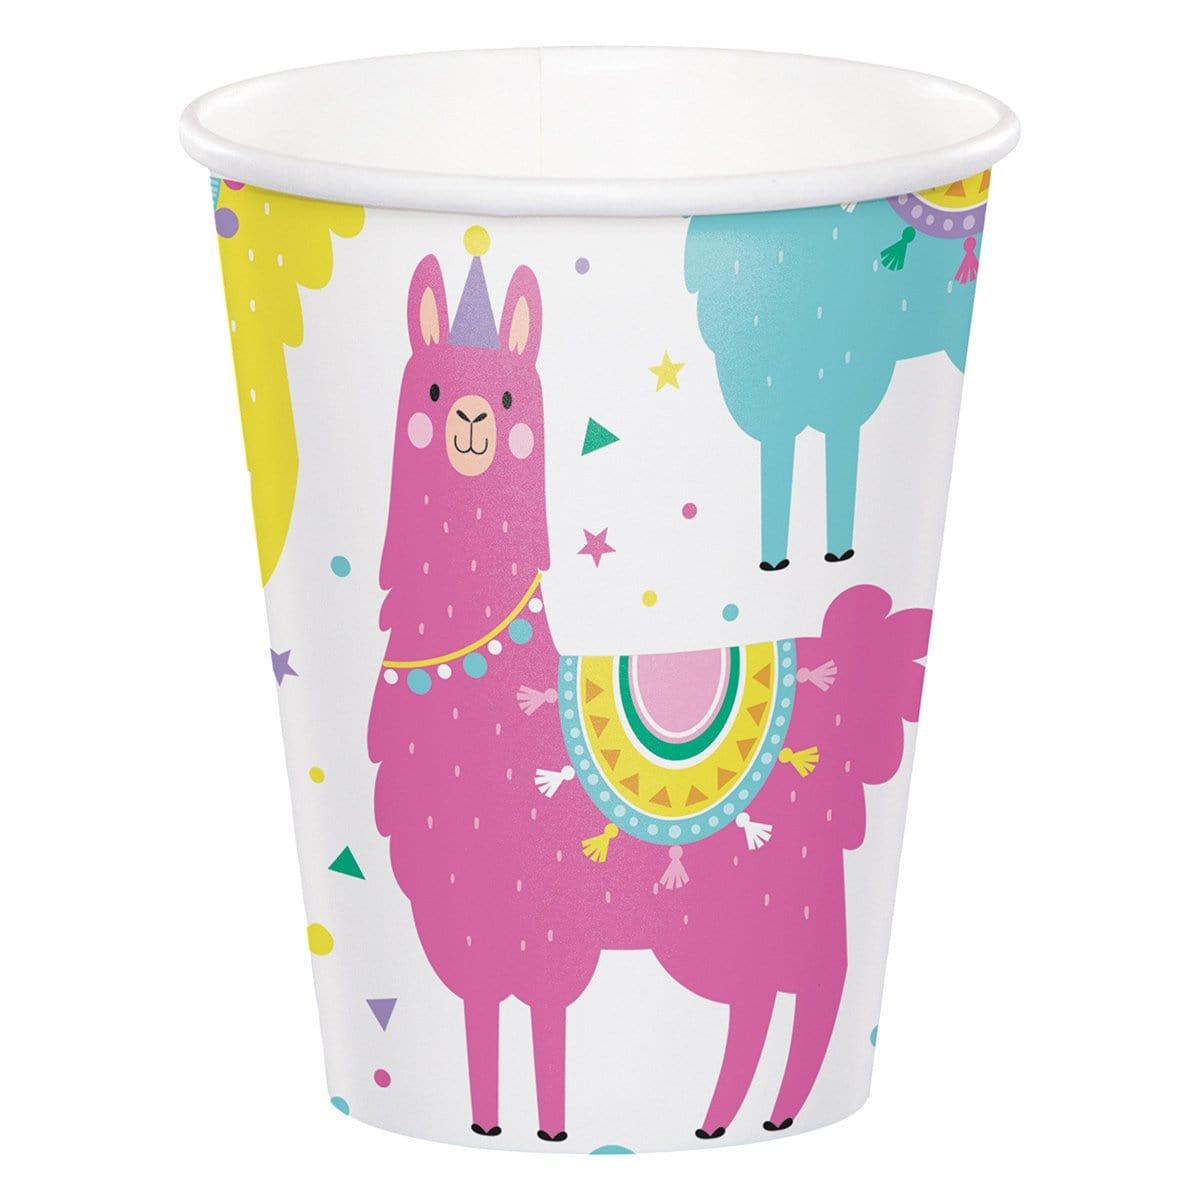 Buy Kids Birthday Llama Party paper cups 9 ounces, 8 per package sold at Party Expert